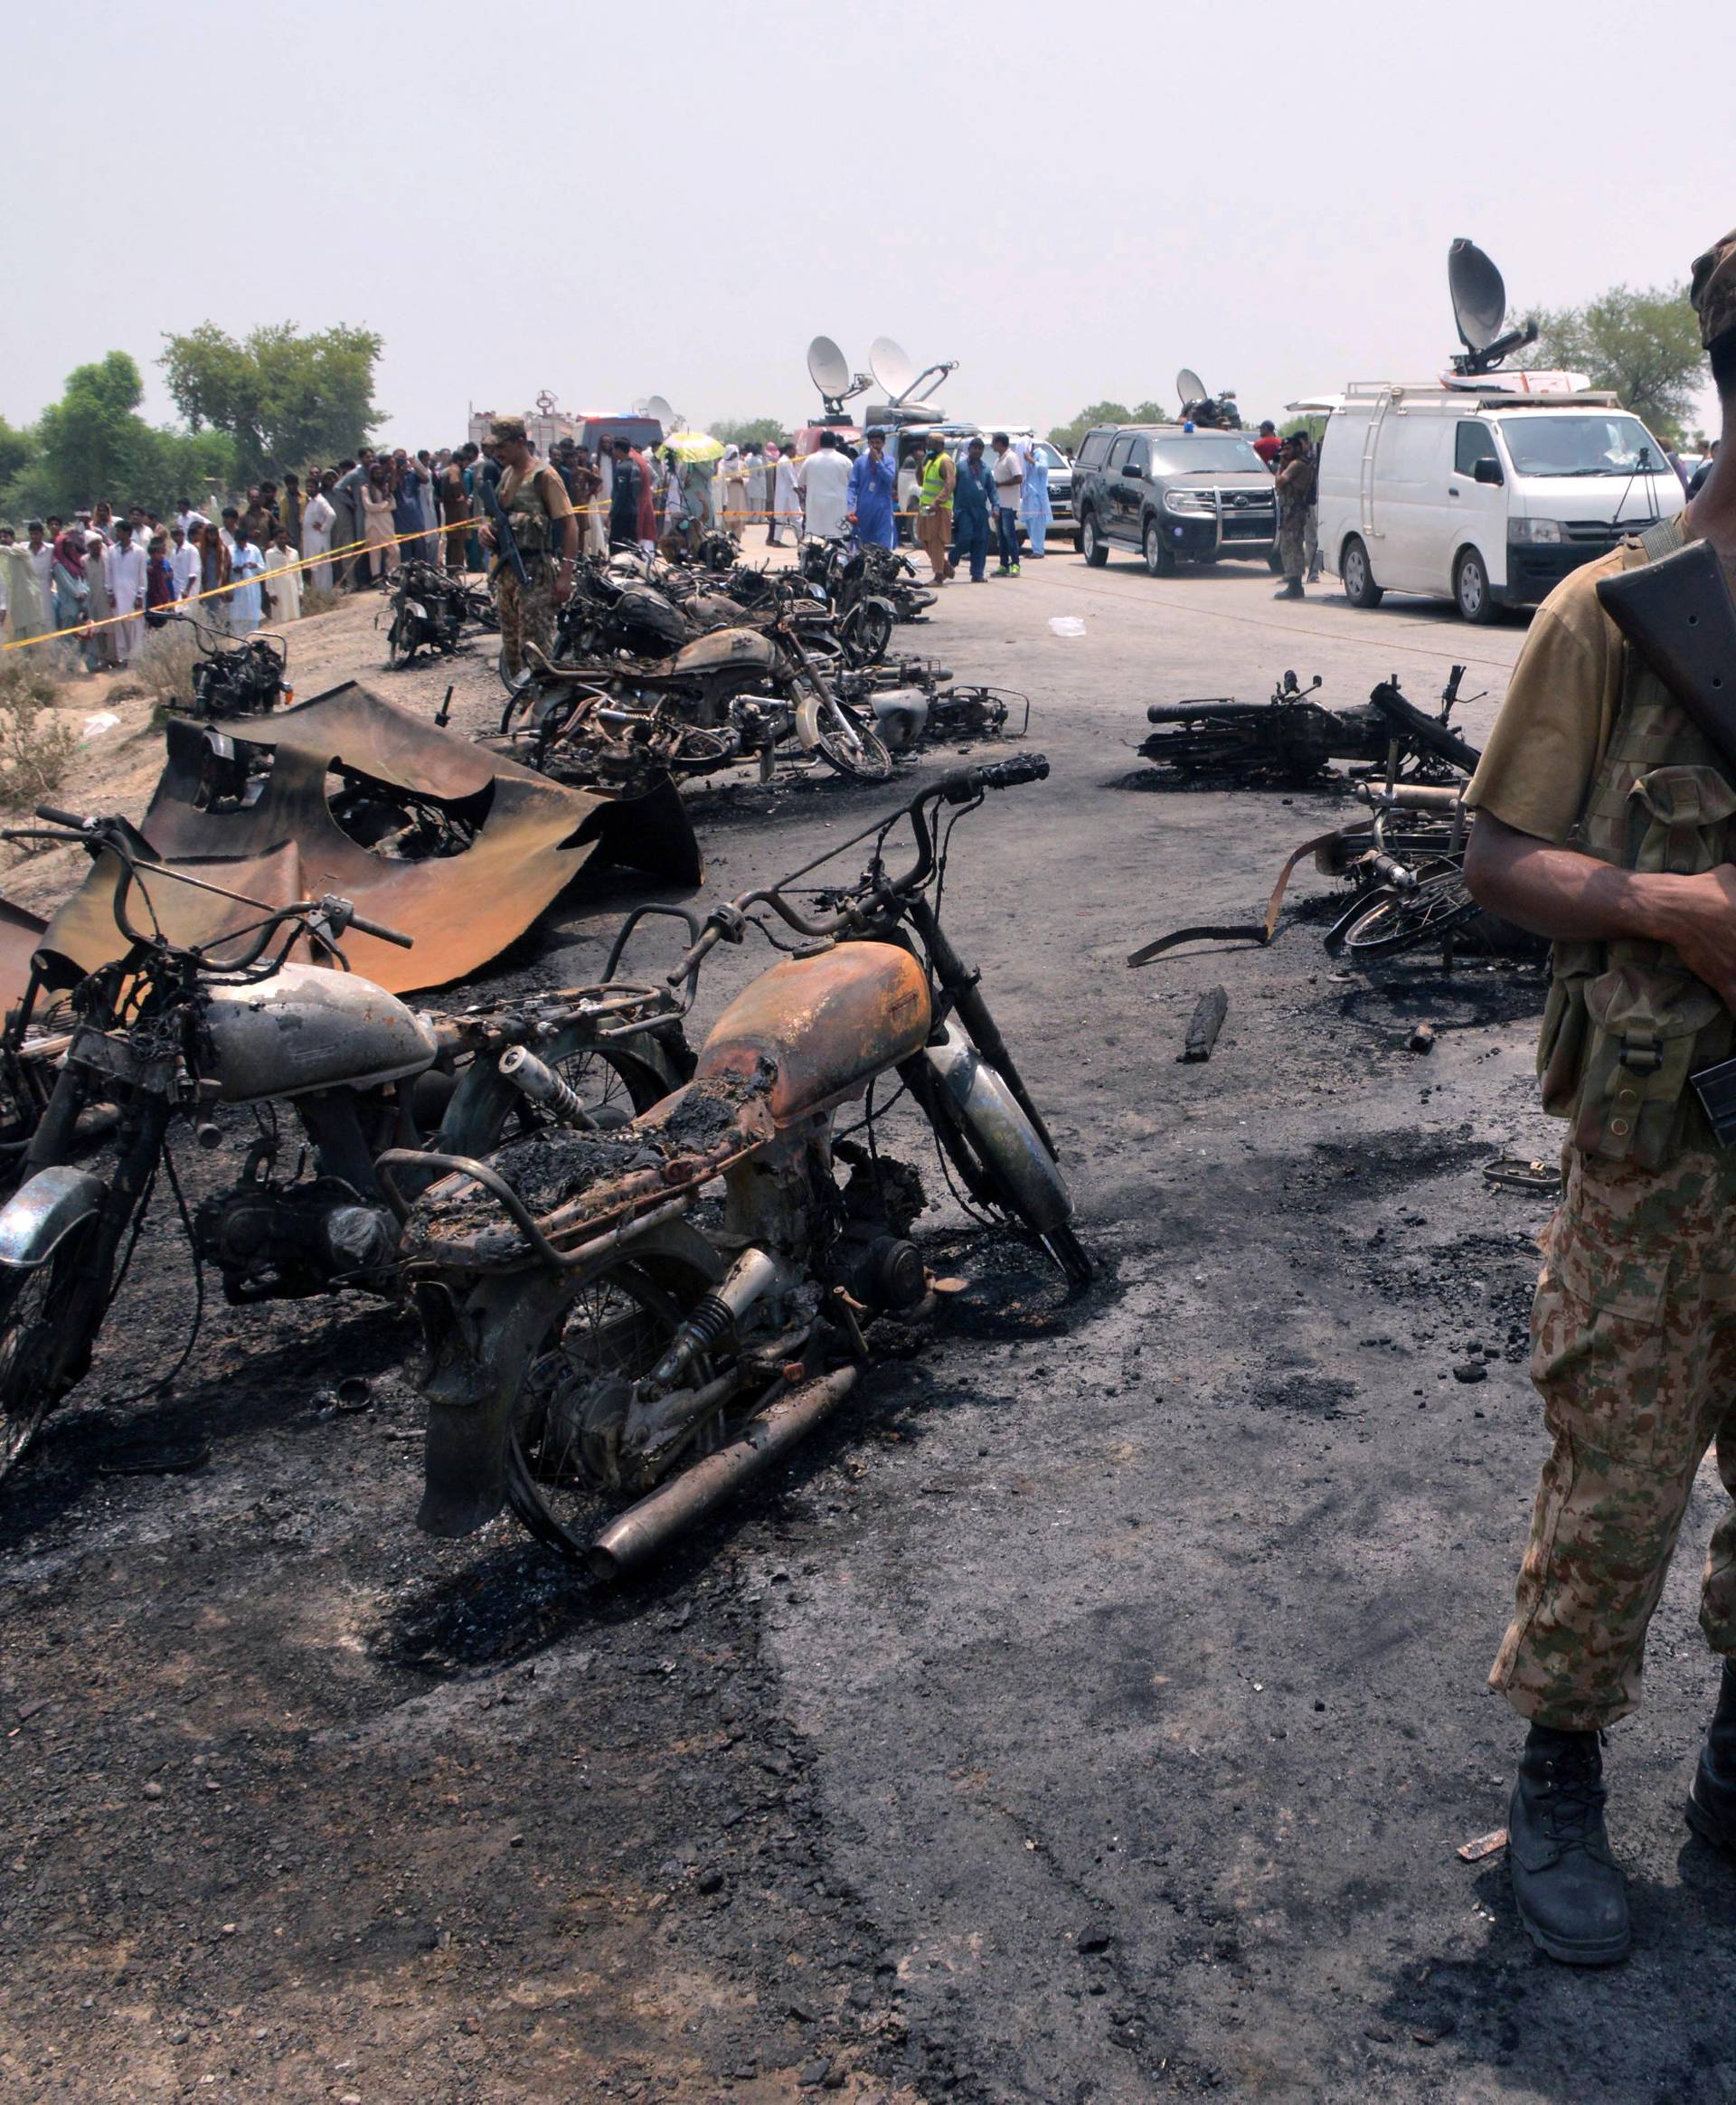 Soldier stands guard amid burnt out cars and motorcycles in Bahawalpur